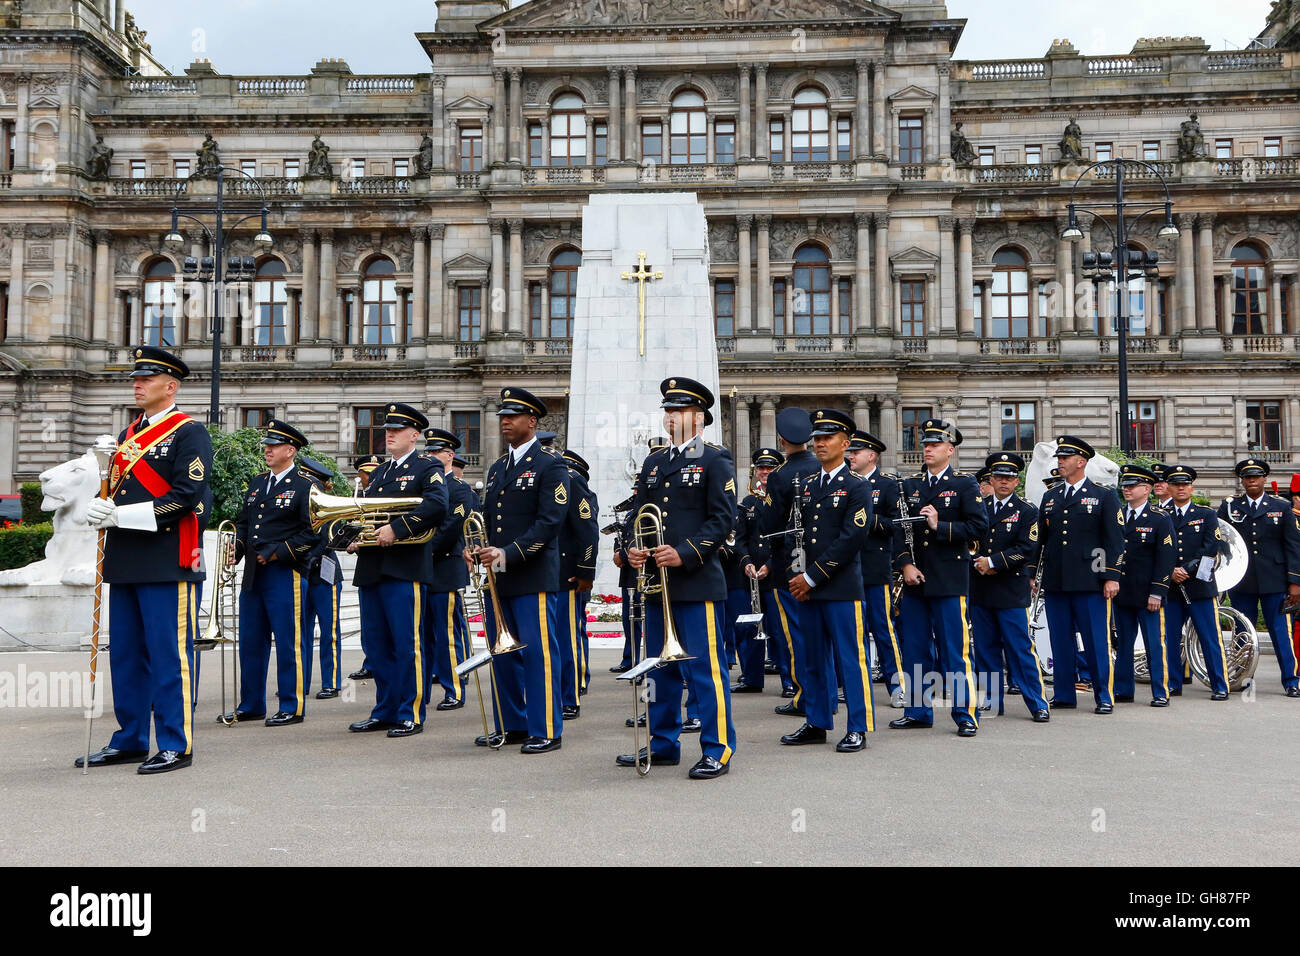 Glasgow, UK. 9th August, 2016. On the second day of 'Piping Life' the bands from The Royal Edinburgh Military Tattoo parade around George Square before entering the Piping Live arena for a spectacular display. The image is of USA Army Band and Chorus marching in George Square in front of the Cenotaph and City Chambers. Credit:  Findlay/Alamy Live News Stock Photo